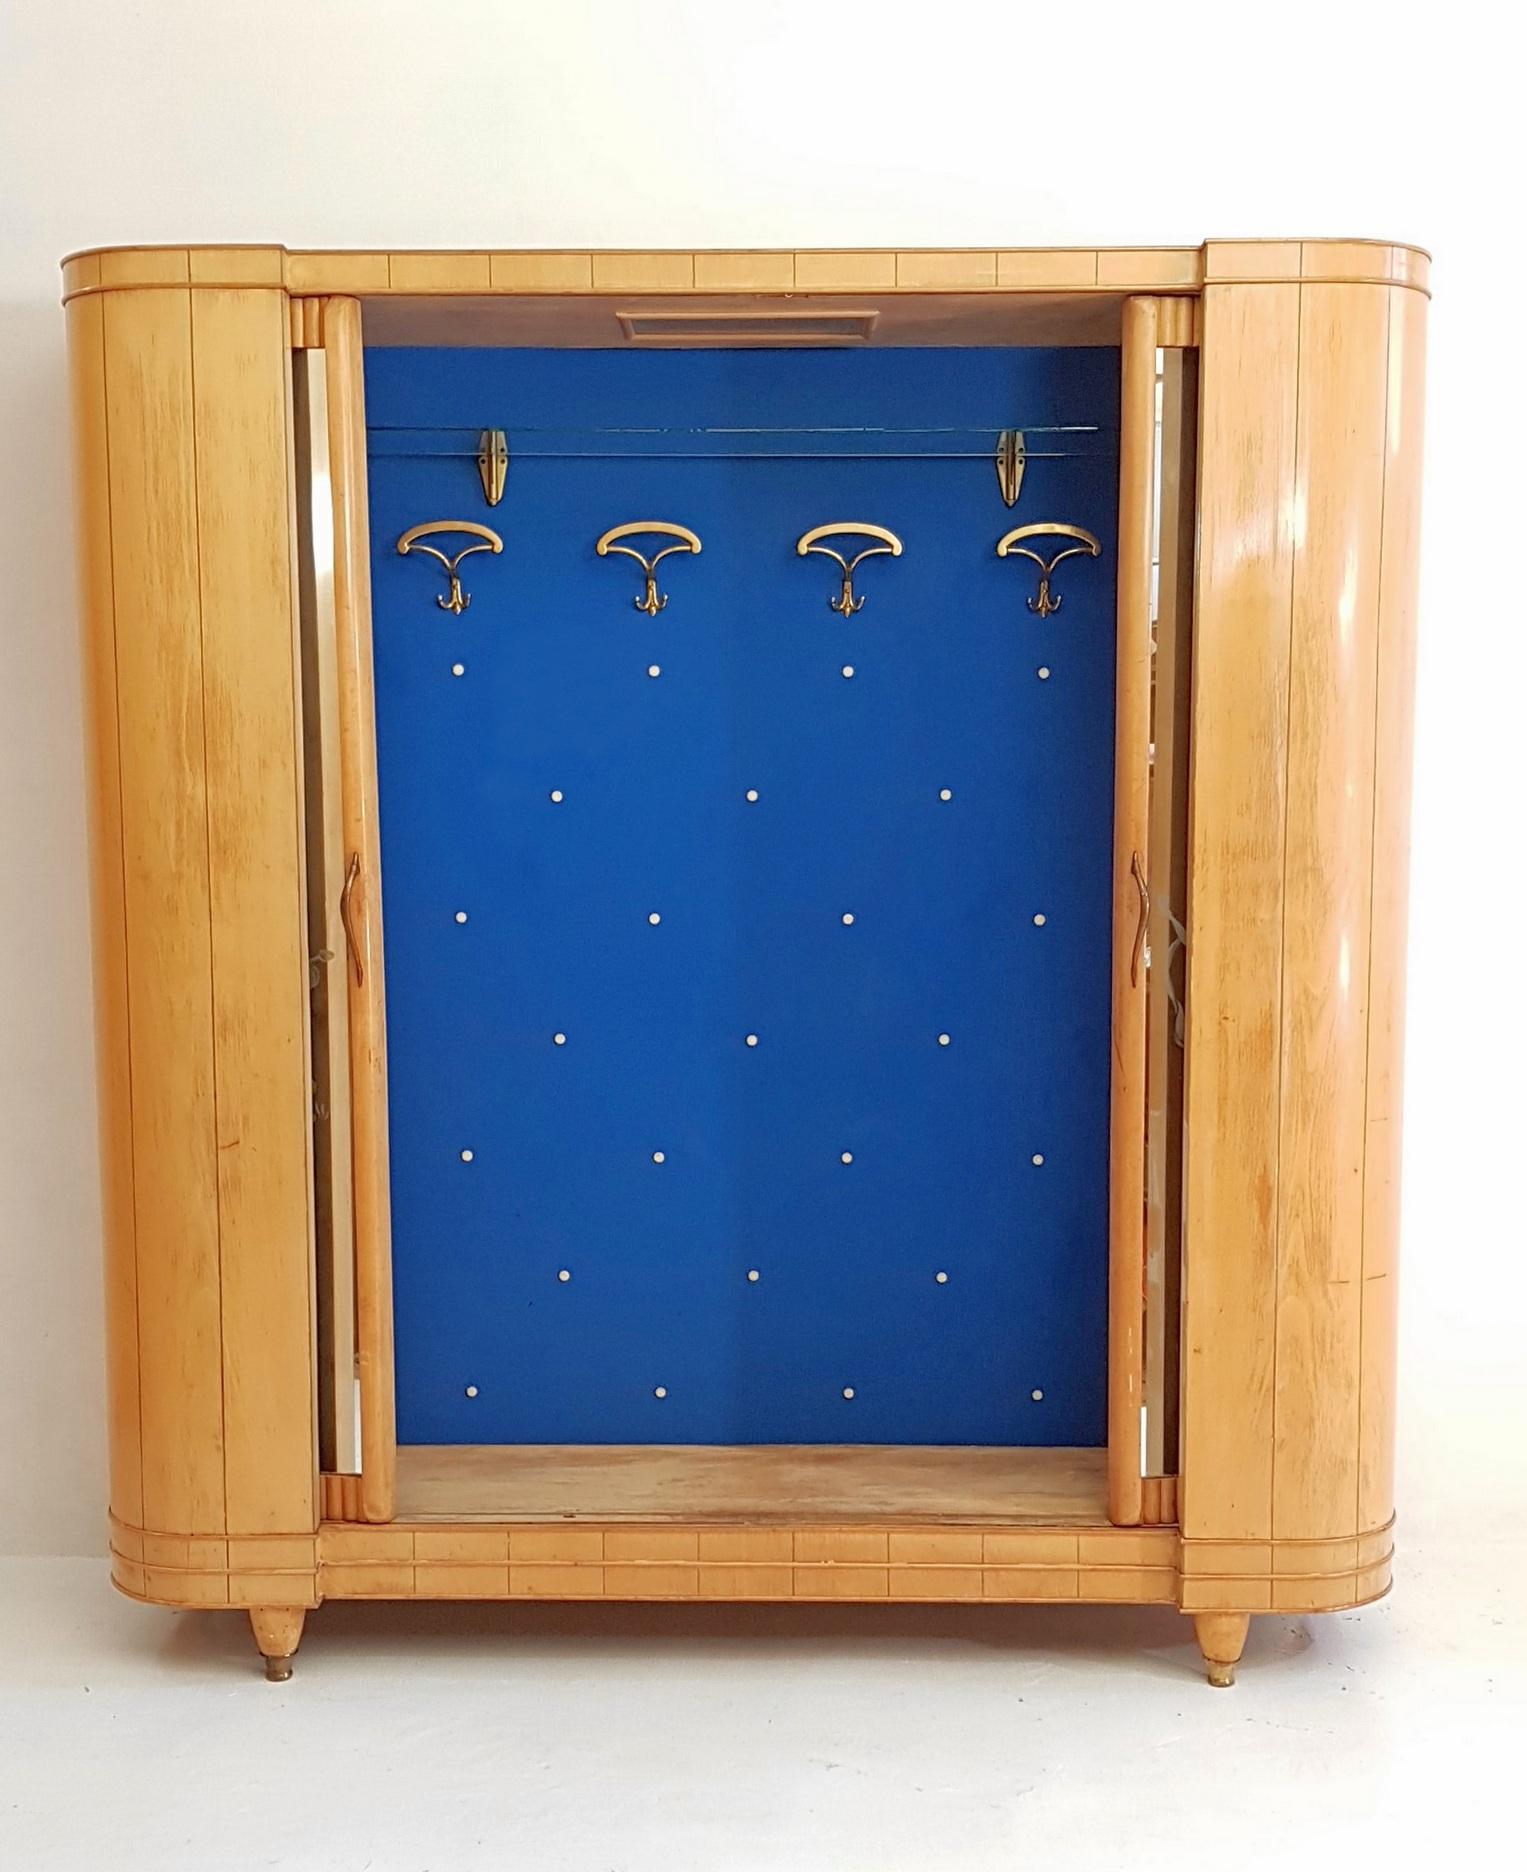 Beautiful wardrobe in ashwood for the entrance to put away coats, jackets, hats and umbrellas. This piece is produced with a very high quality. It features roll away doors with etched mirrors that slide in to the sides. And when they open there is a